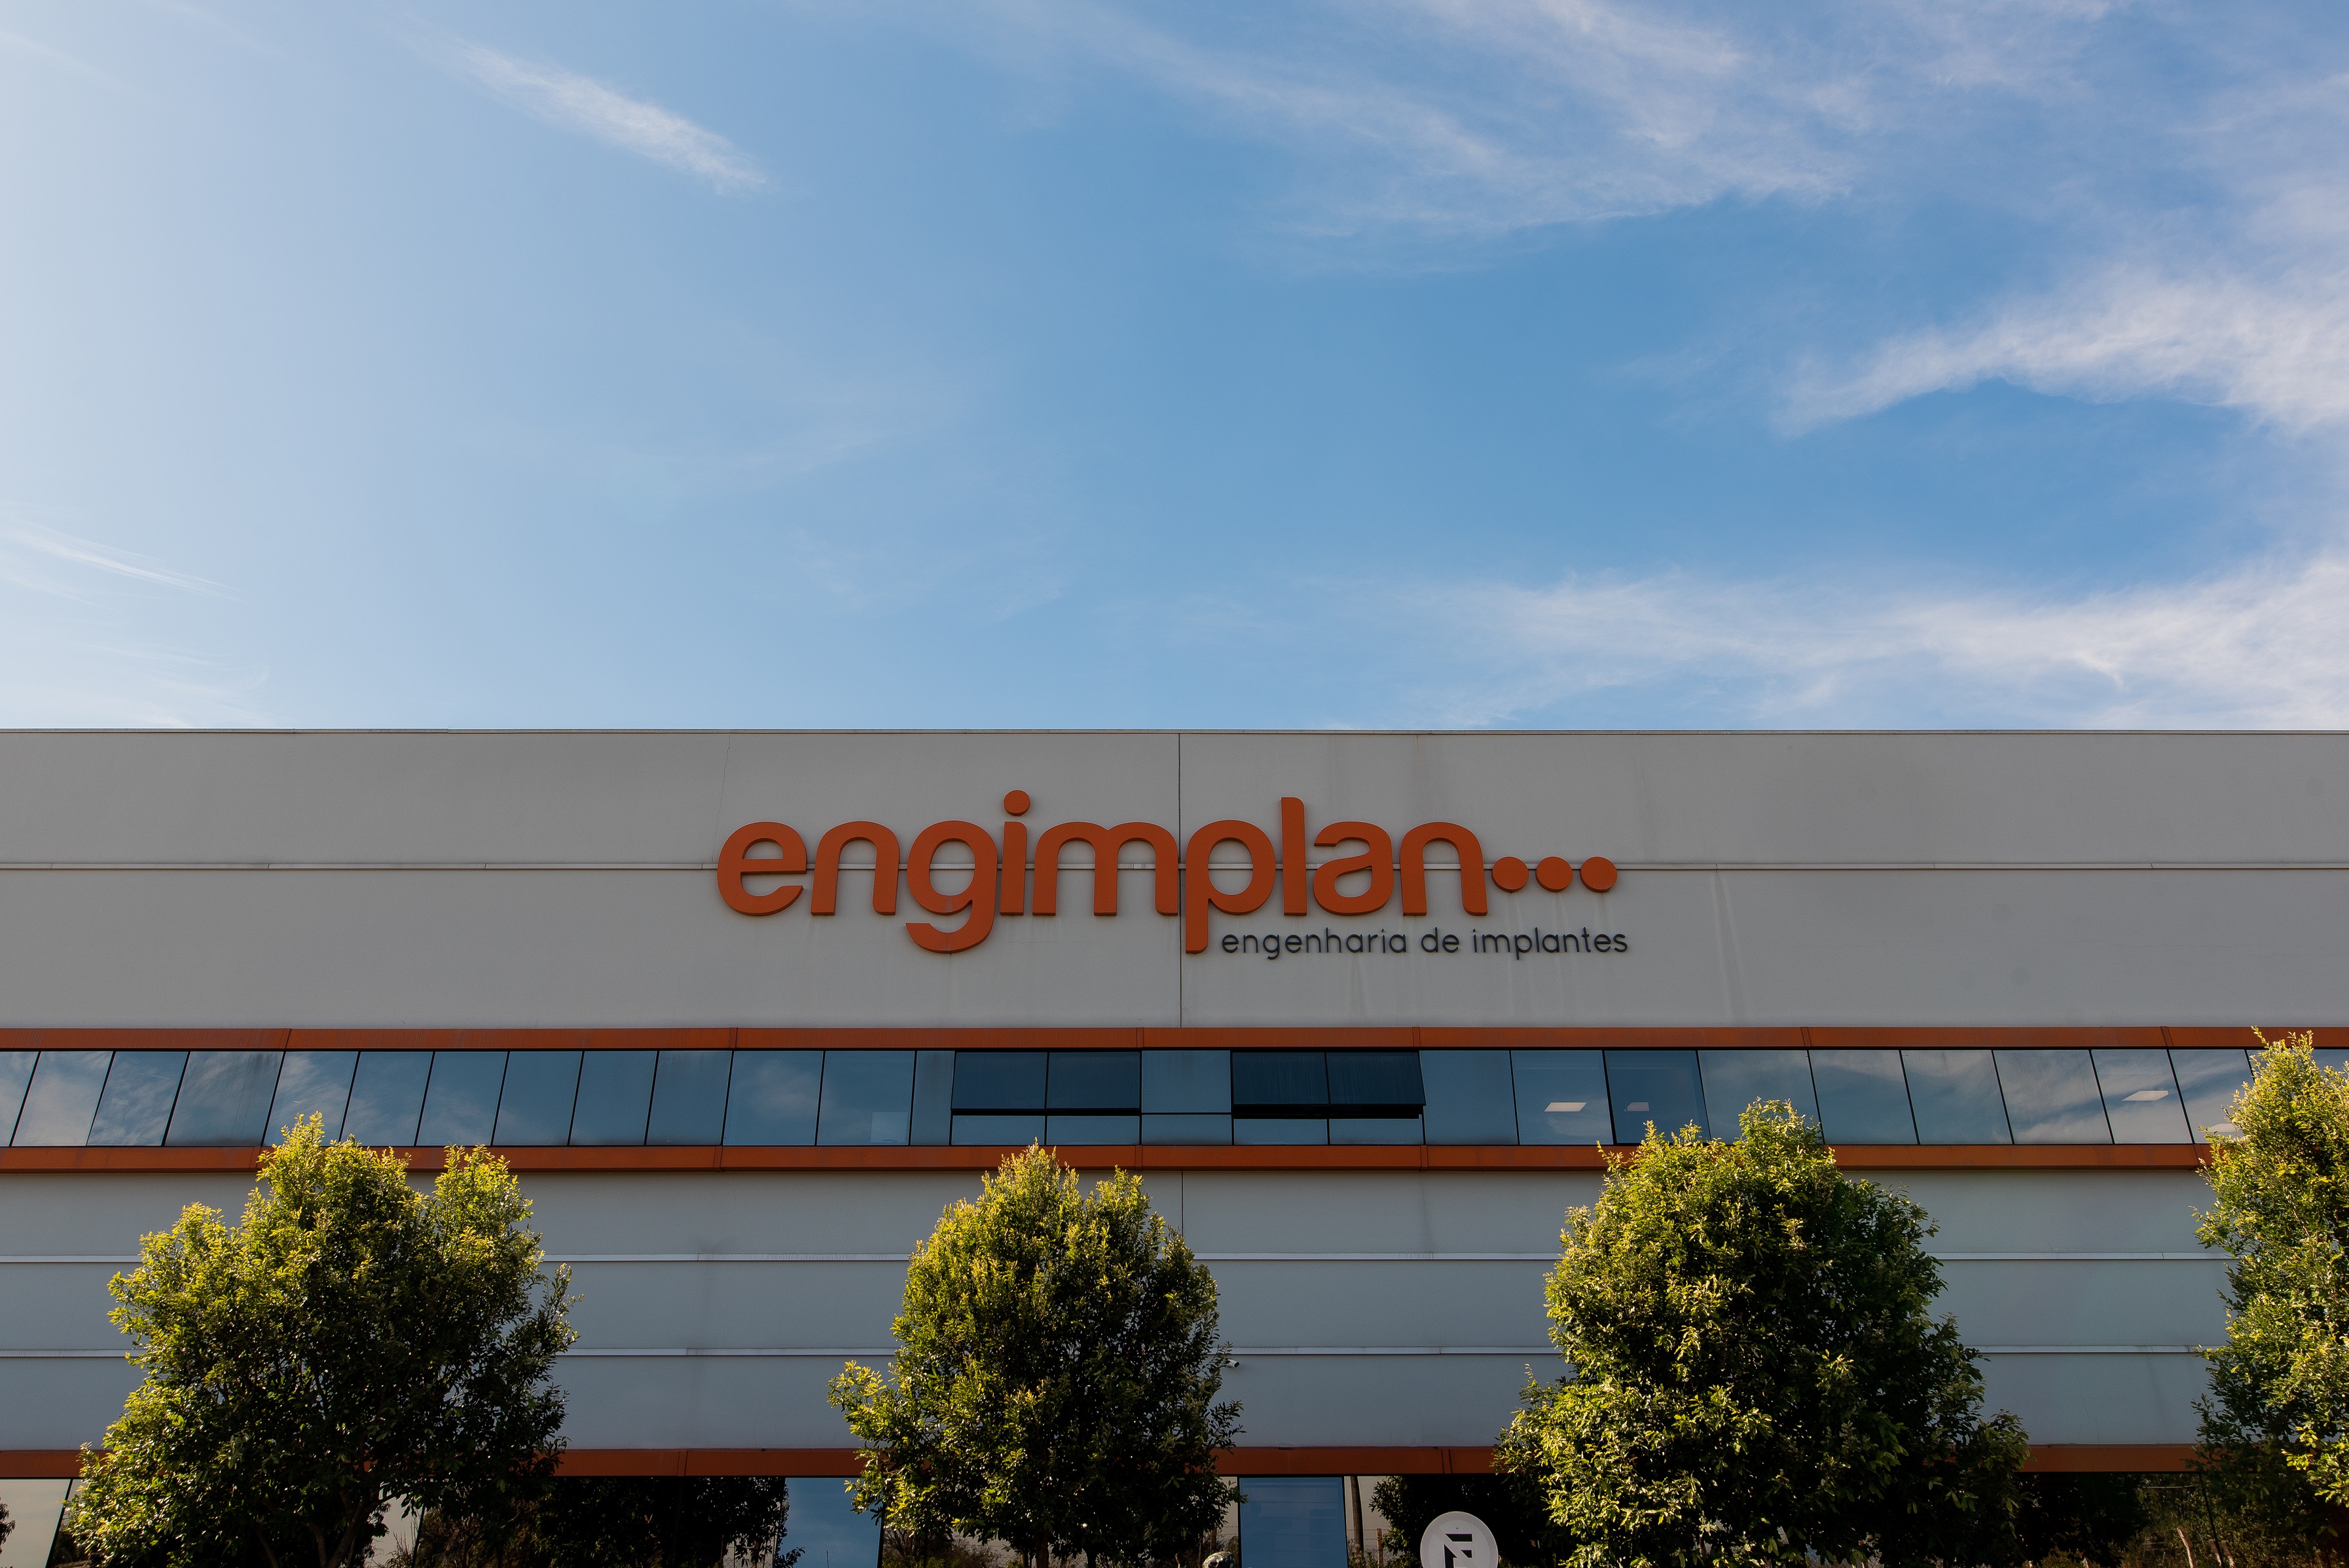 Materialise Buys Majority Stake in Engimplan, Expands Medical 3D Printing Business in Brazil